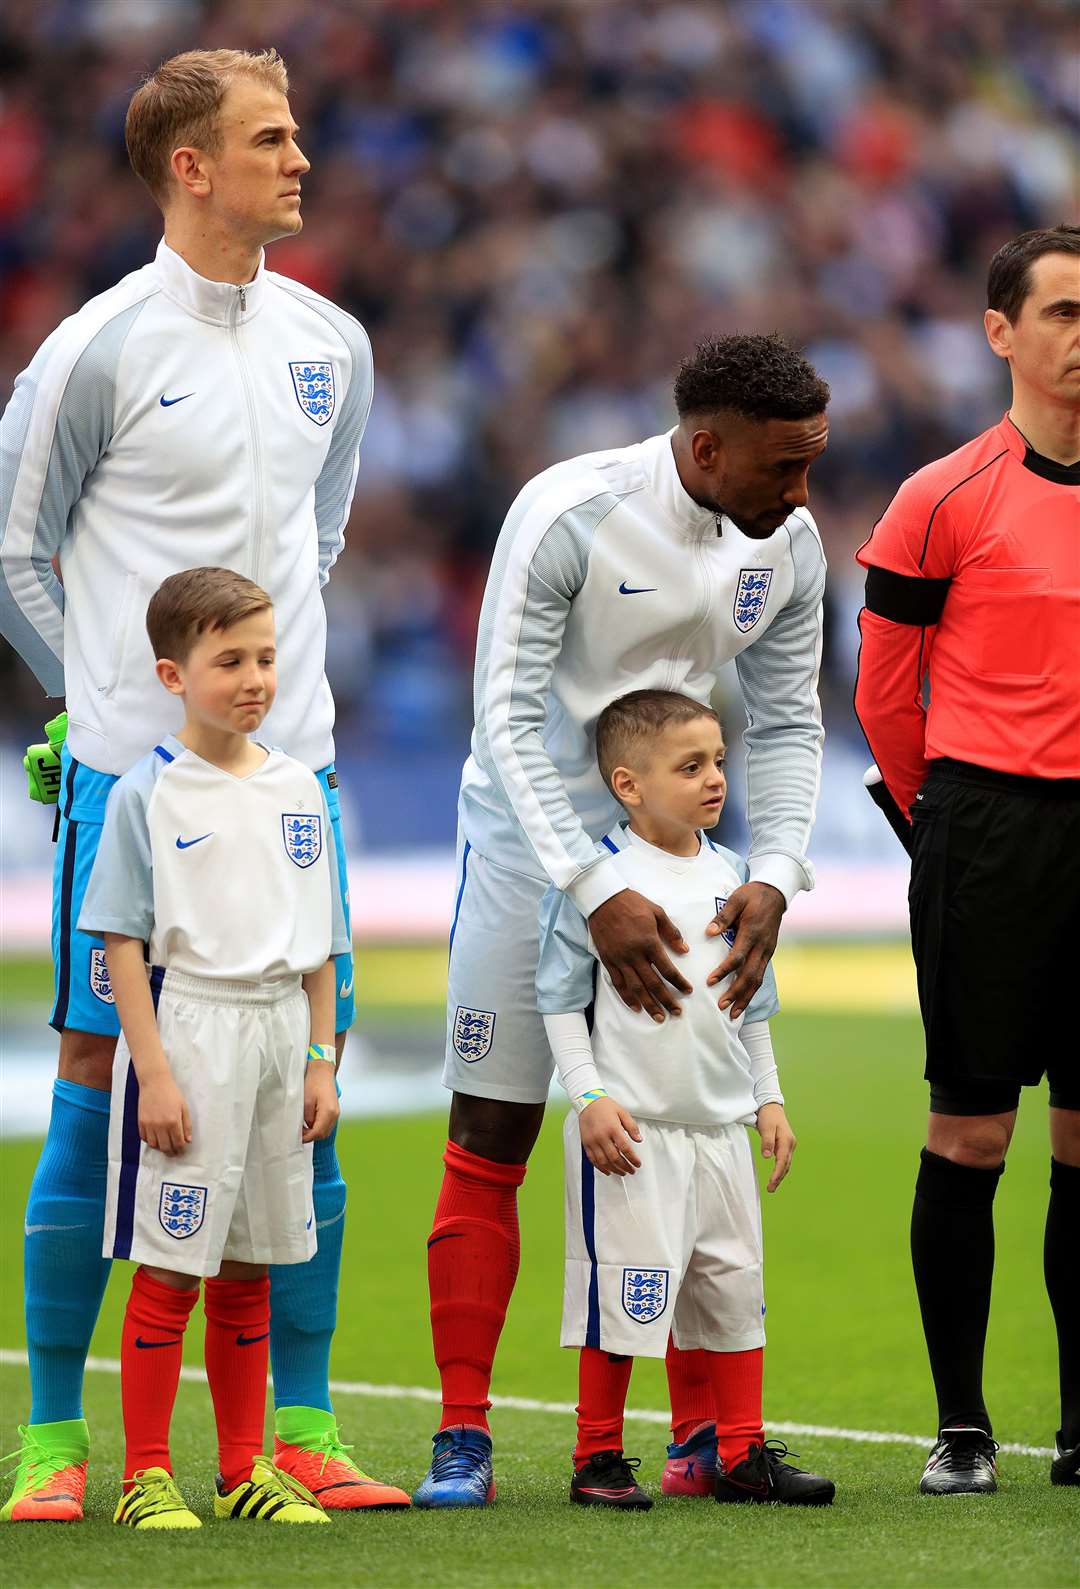 England’s Jermain Defoe with mascot Bradley Lowery during the World Cup Qualifying match at Wembley Stadium (Adam Davy/PA)